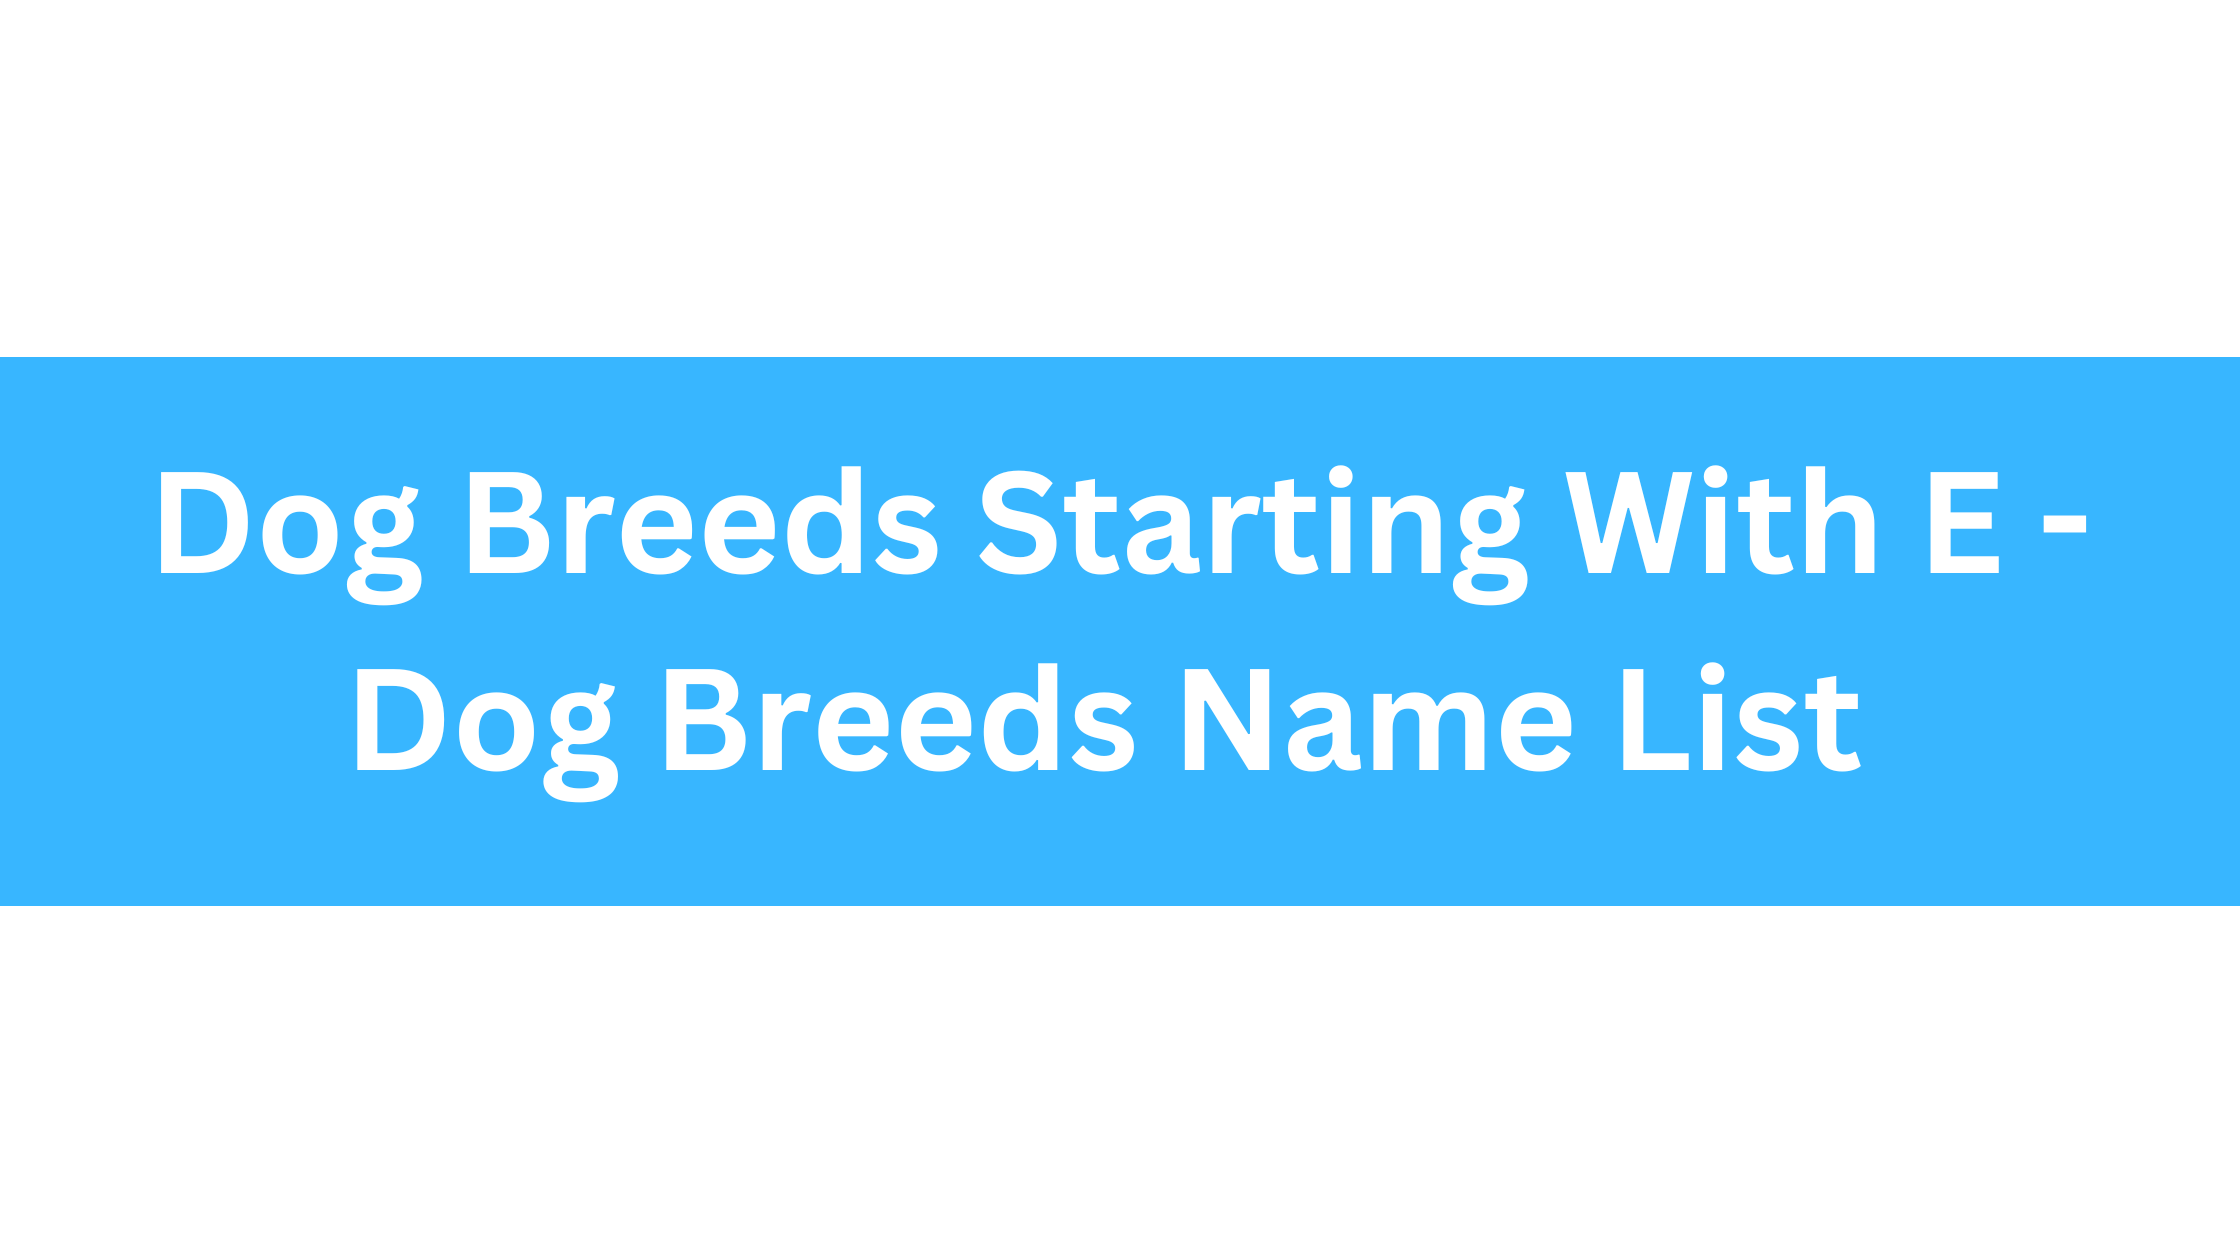 Dog Breeds Starting With E